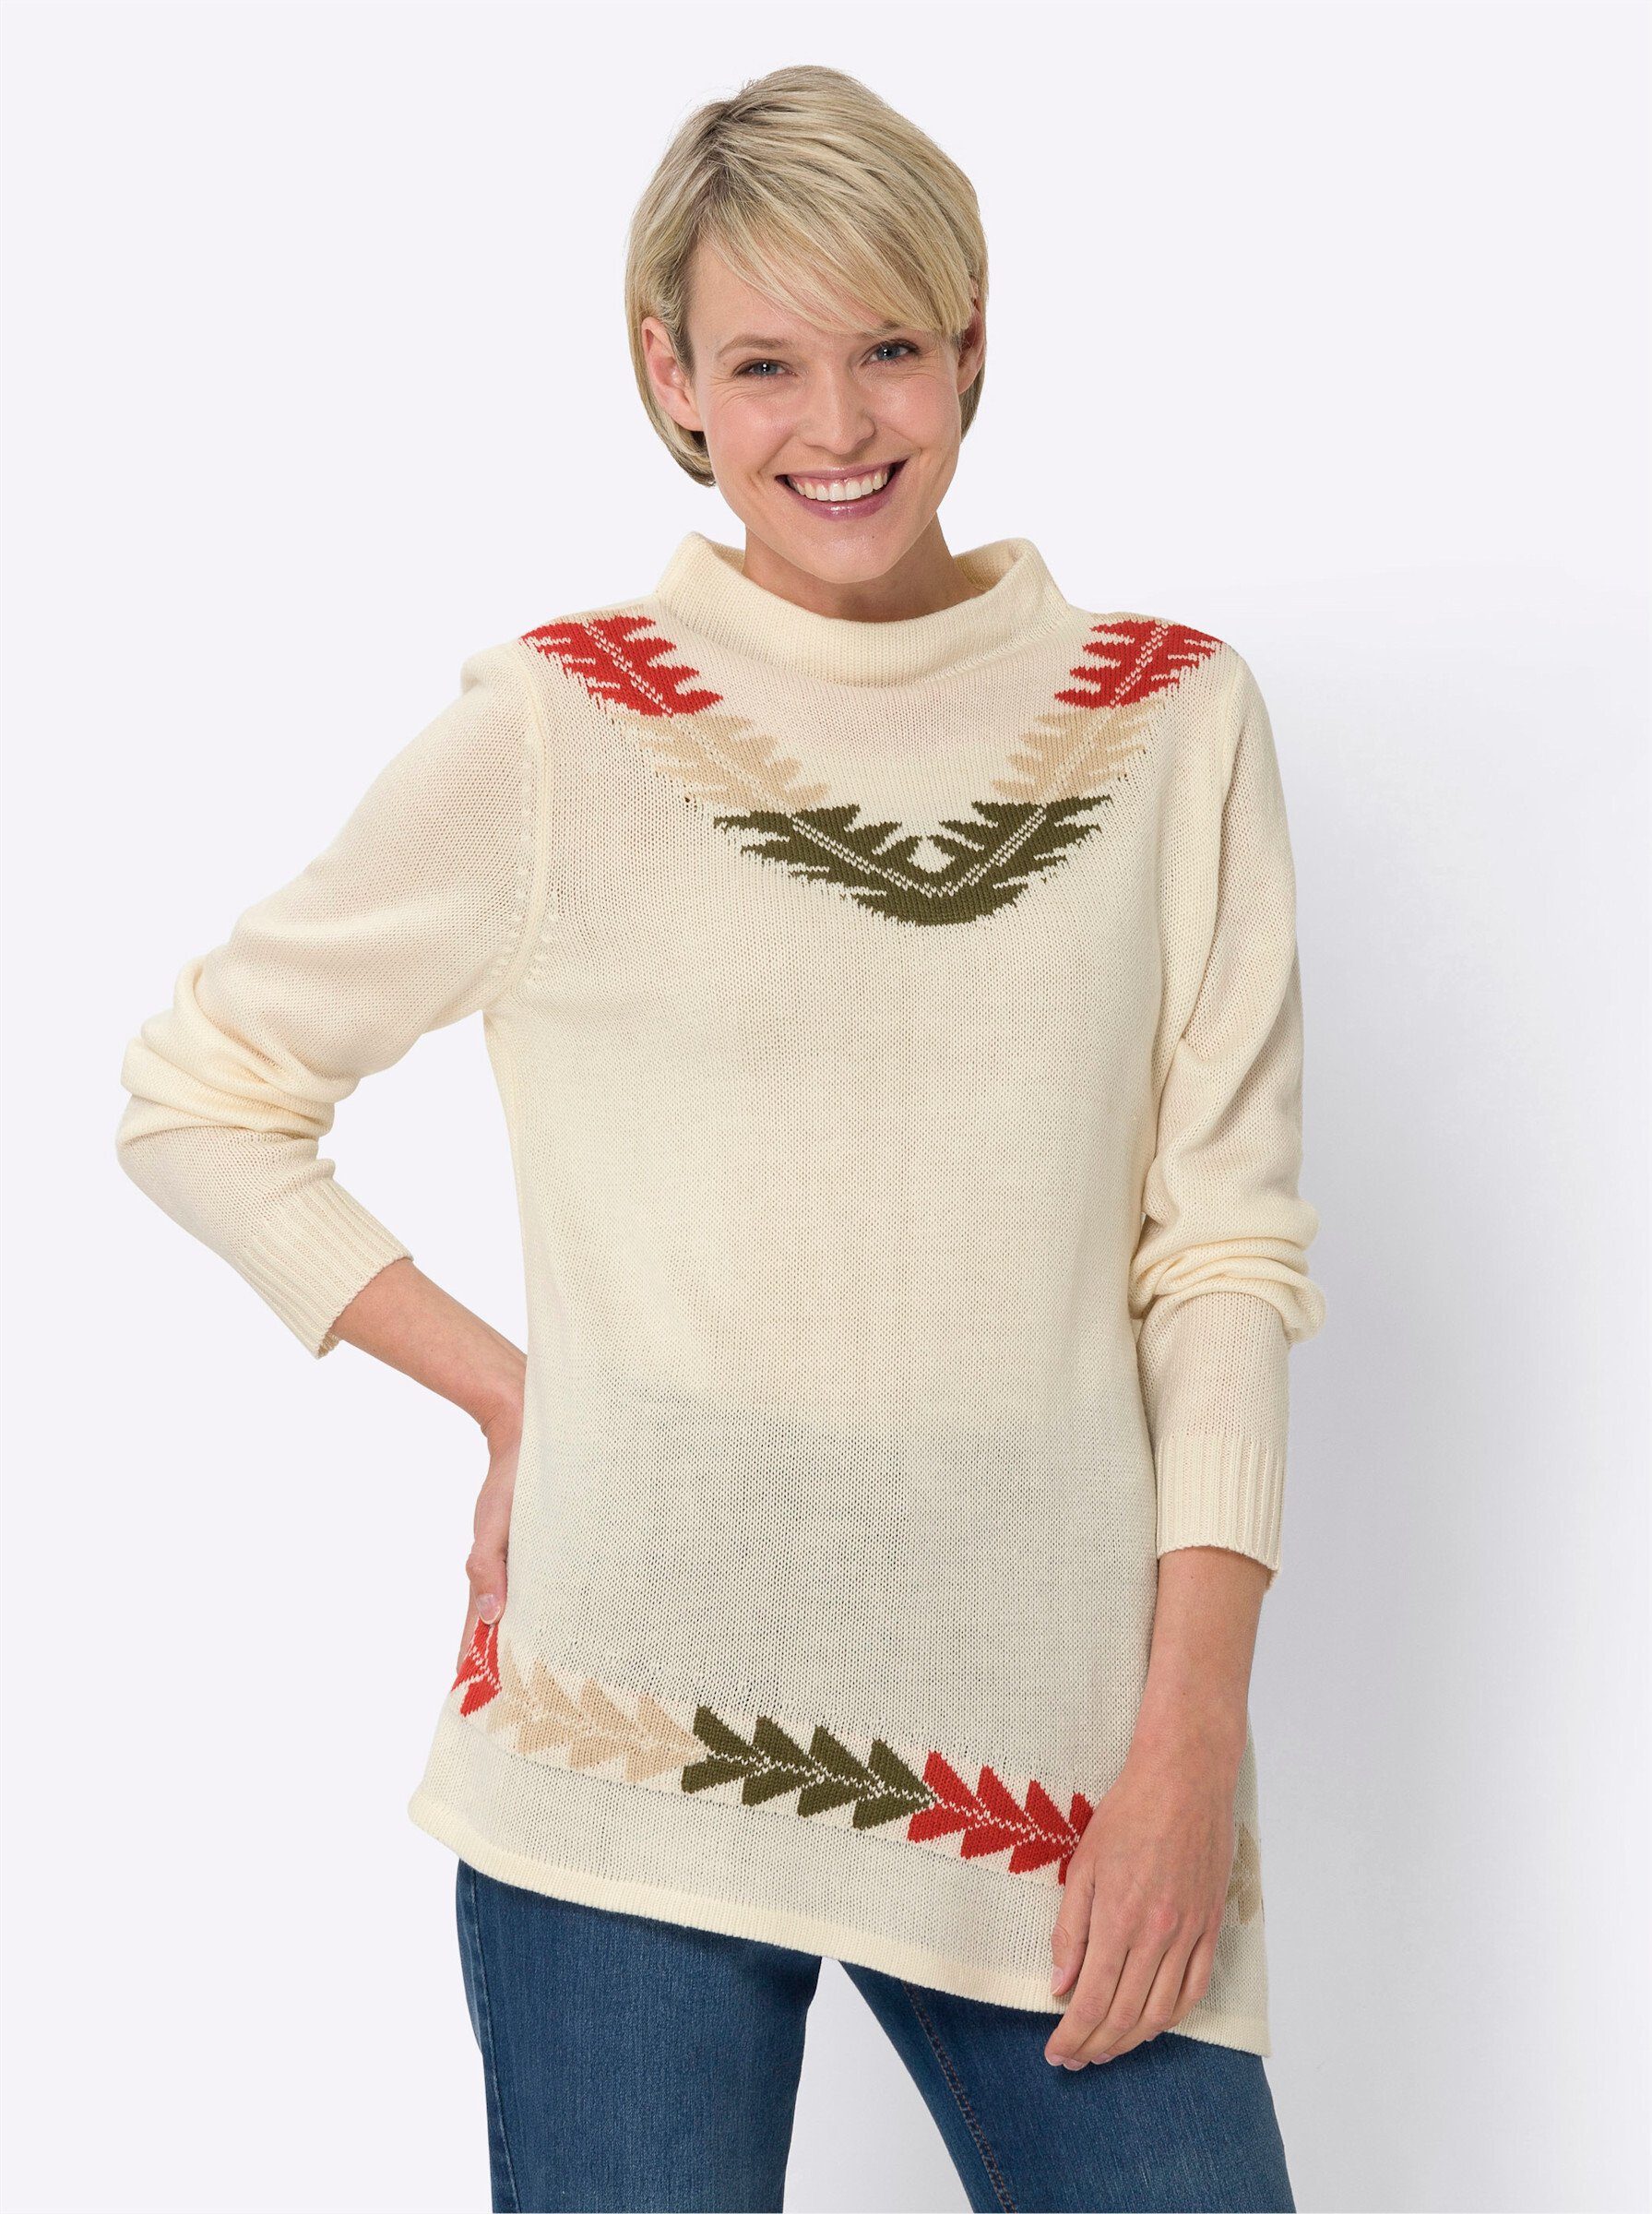 champagner-oliv Strickpullover Sieh an!